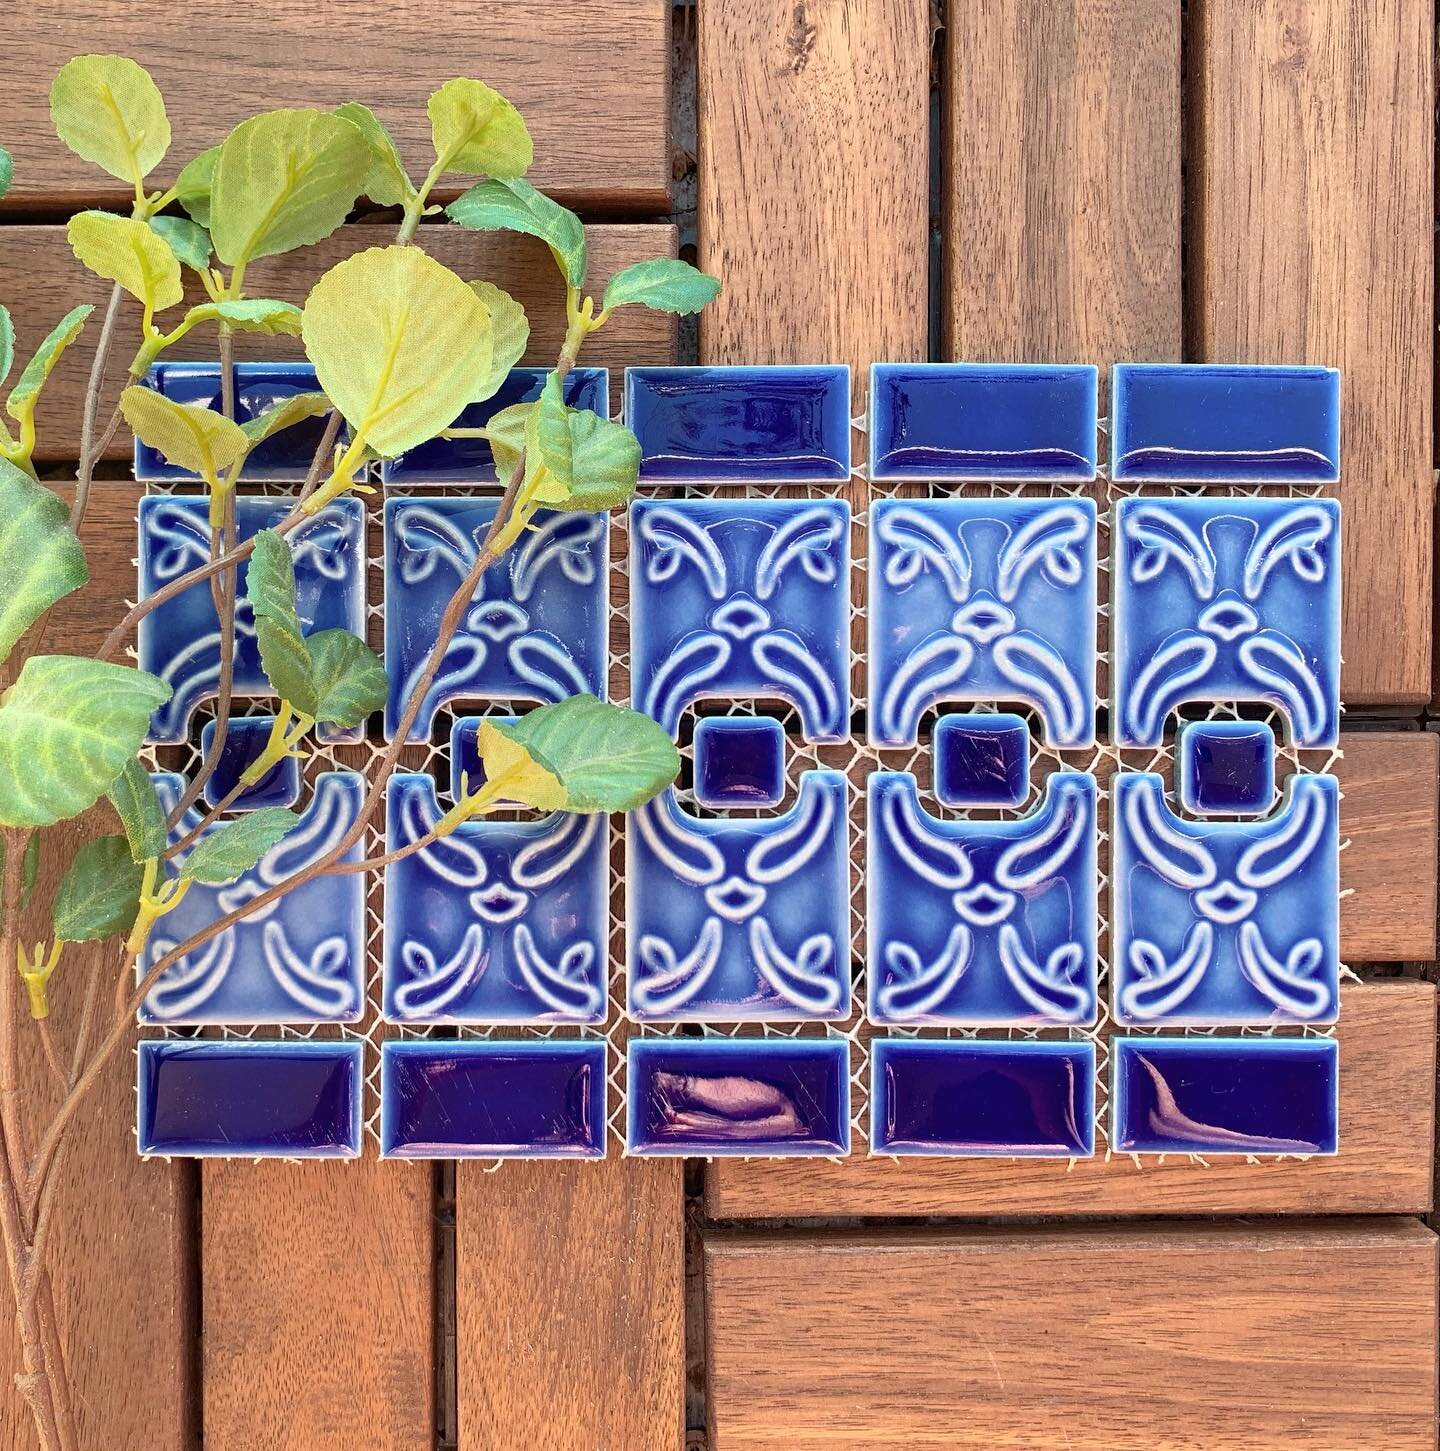 This is the final selection for the waterline tile - it&rsquo;s perfect because it&rsquo;s both a mosaic with 2&rdquo; wide sections - just about the largest we can use because of the rounded corners, and it also has a pretty ornamental detail which 